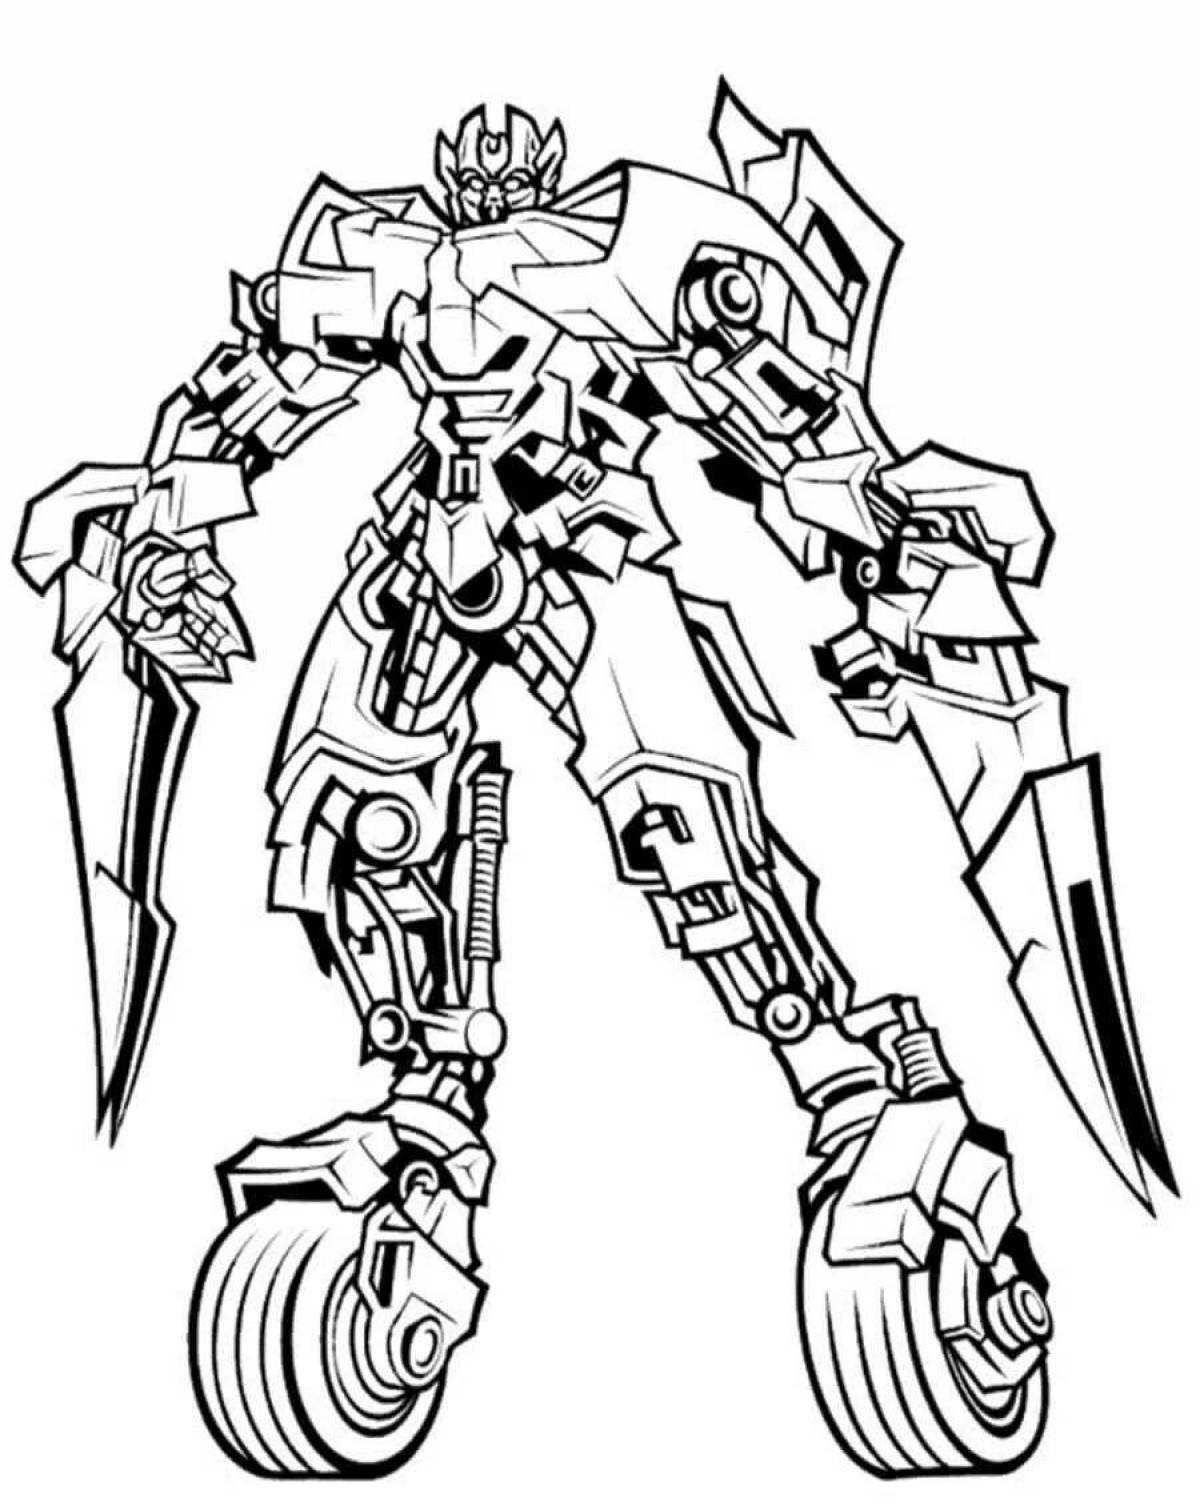 Colorful transforming robot coloring book for kids